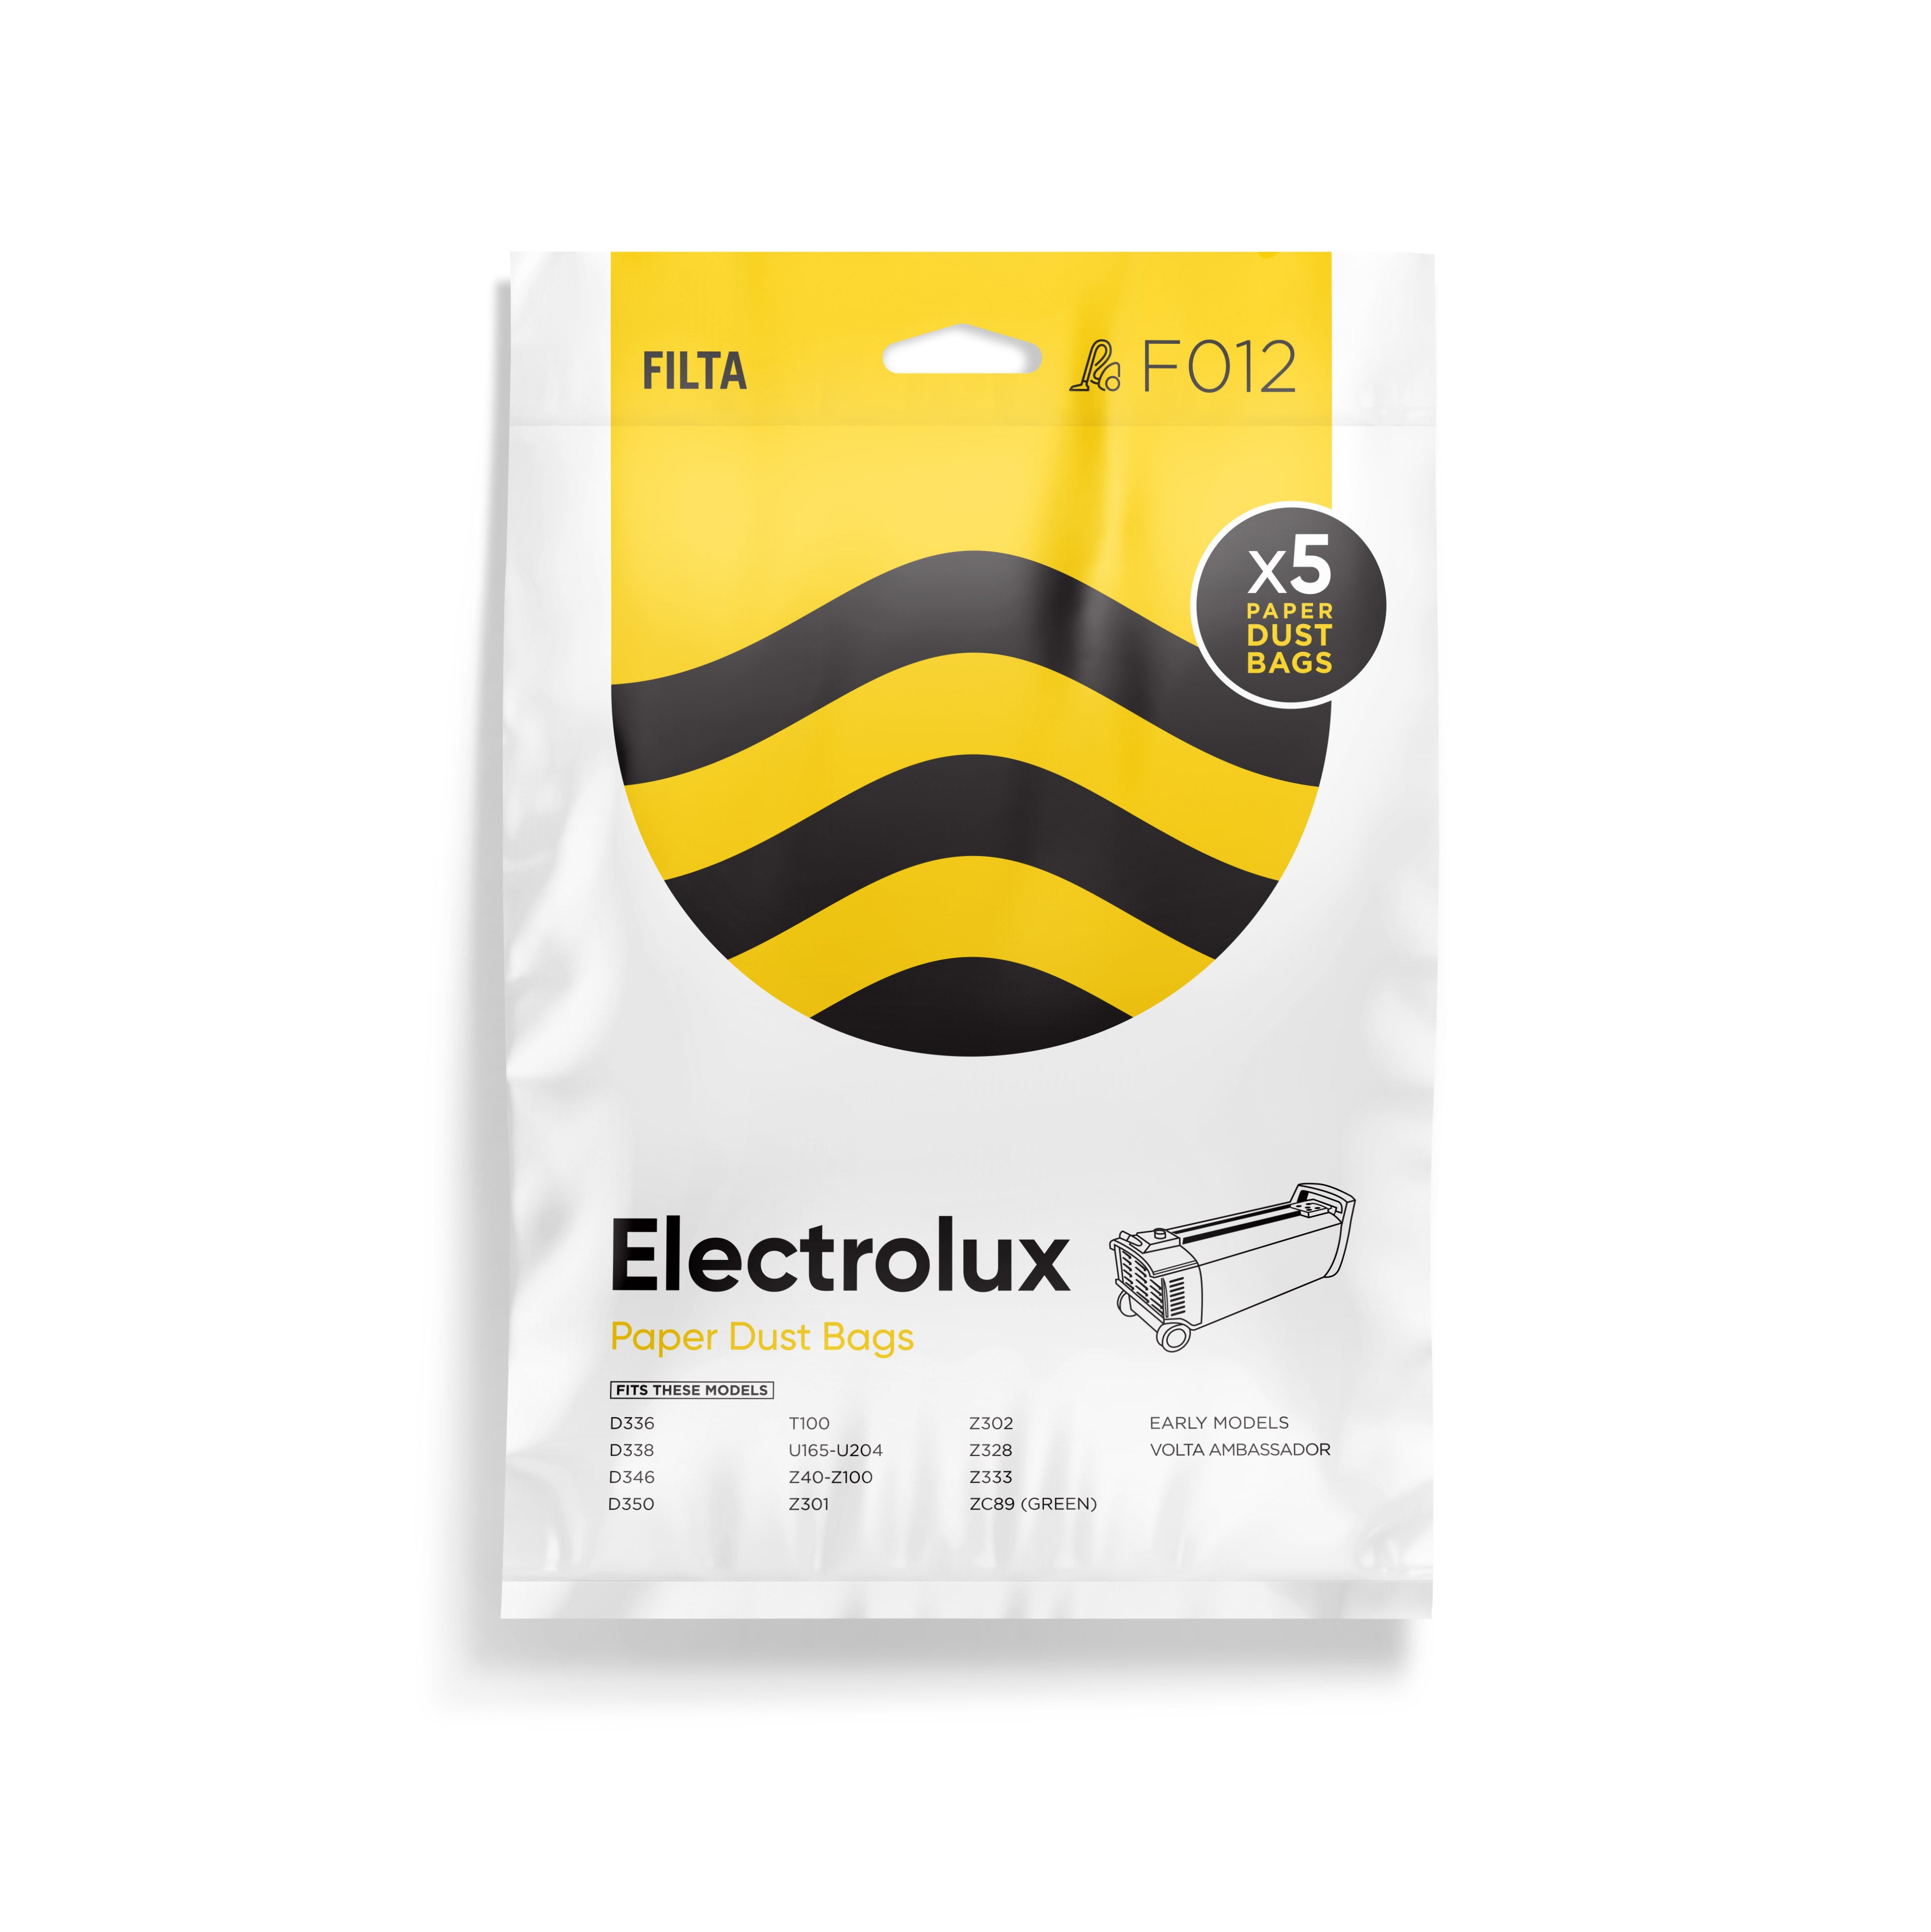 FILTA ELECTROLUX Z302 SMS MULTI LAYERED VACUUM CLEANER BAGS 5 PACK (F012)